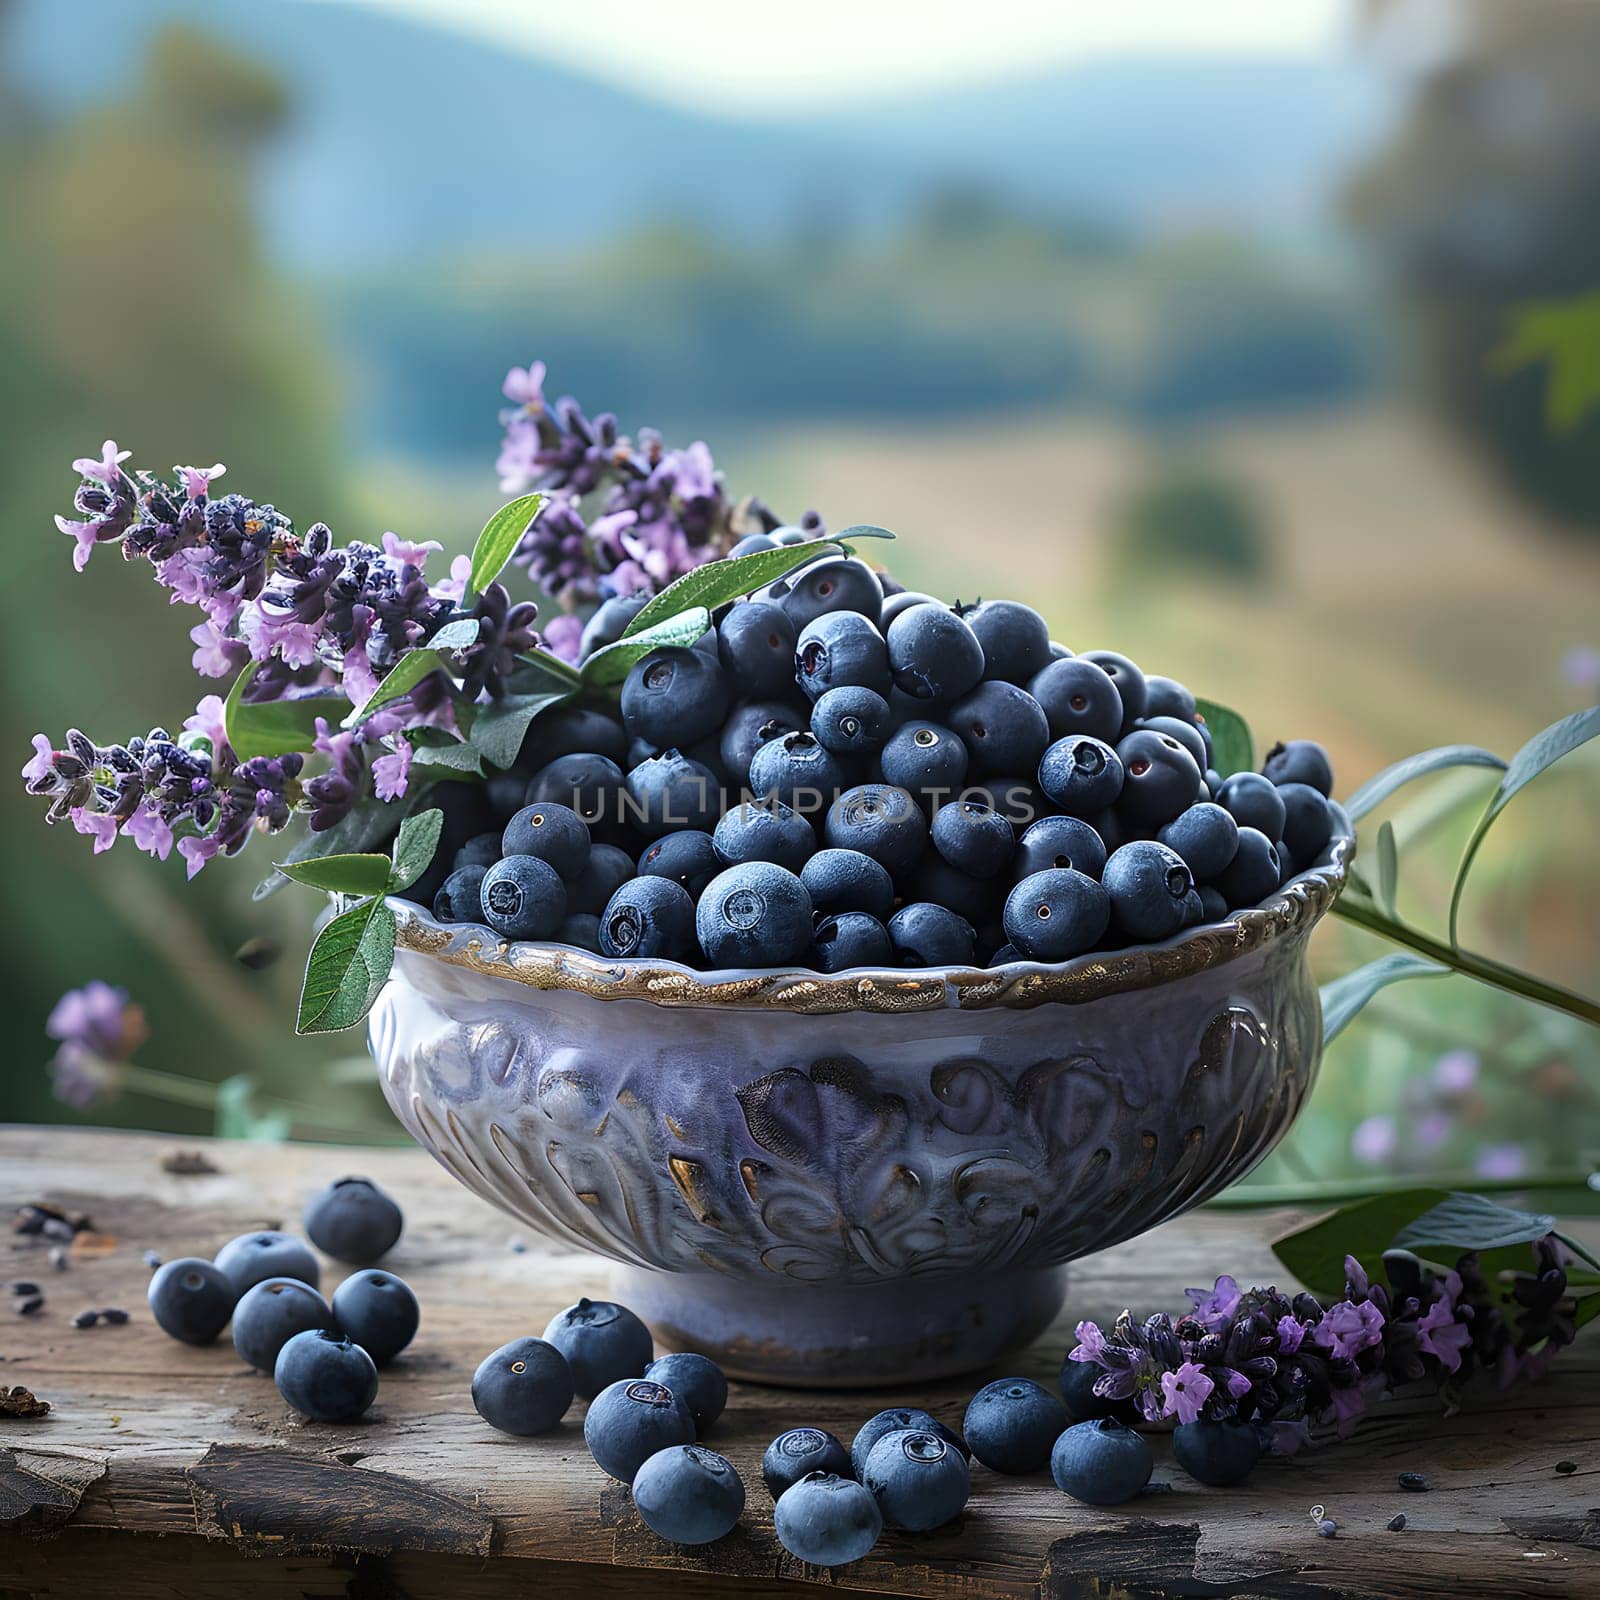 A dish of fresh blueberries, accompanied by elegant purple flowers, sits on a table. This delicious and colorful fruit pairs beautifully with the natural decor